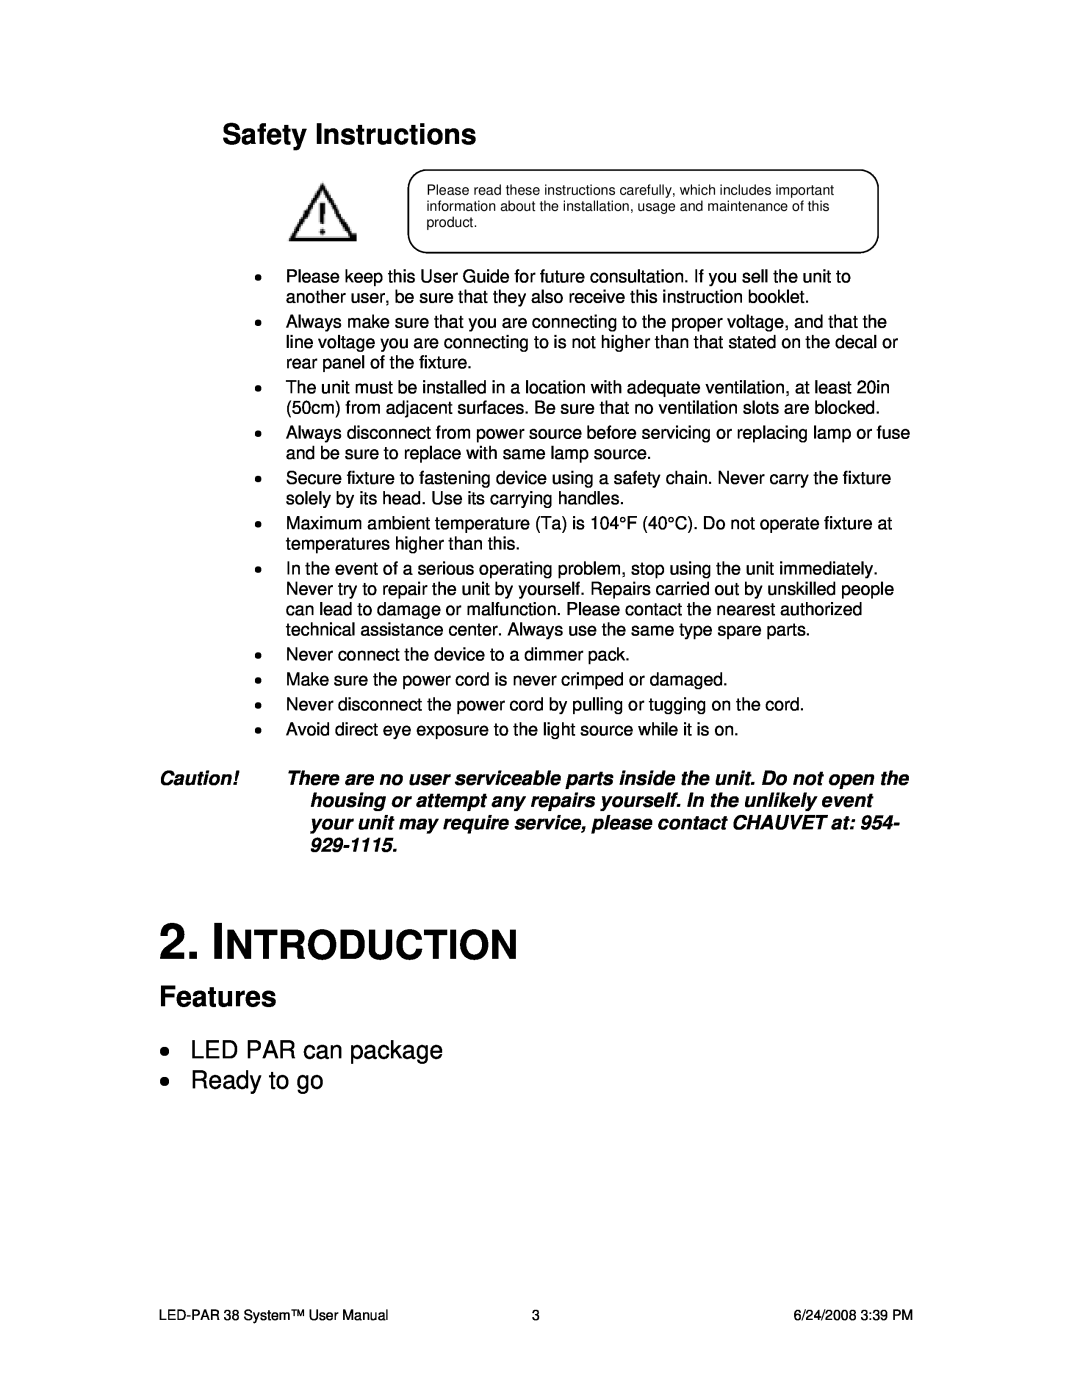 Chauvet 38 user manual Introduction, Safety Instructions, Features, LED PAR can package Ready to go 